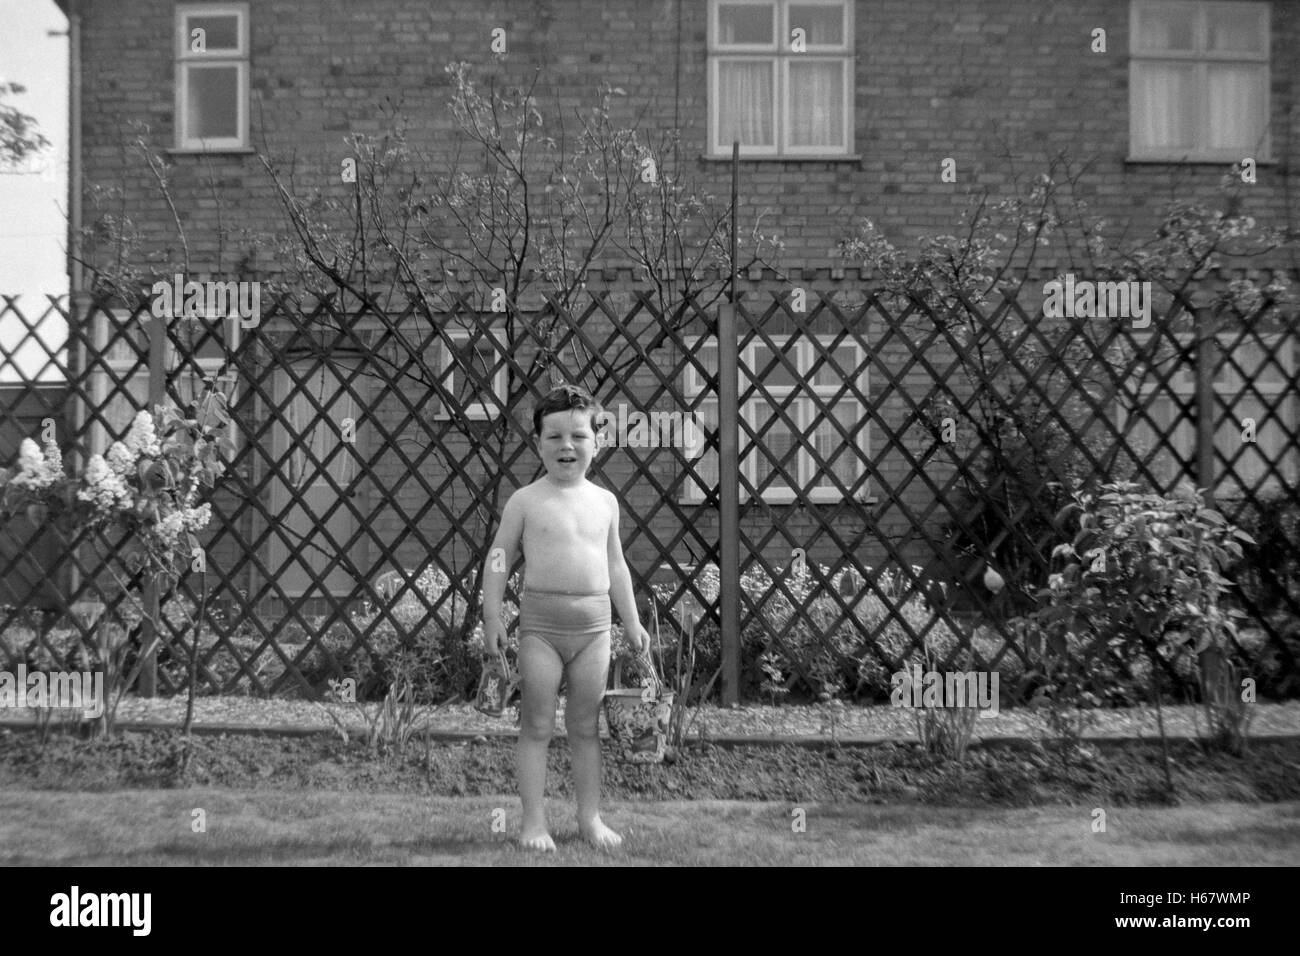 young boy playing in garden with buckets uk 1950s Stock Photo